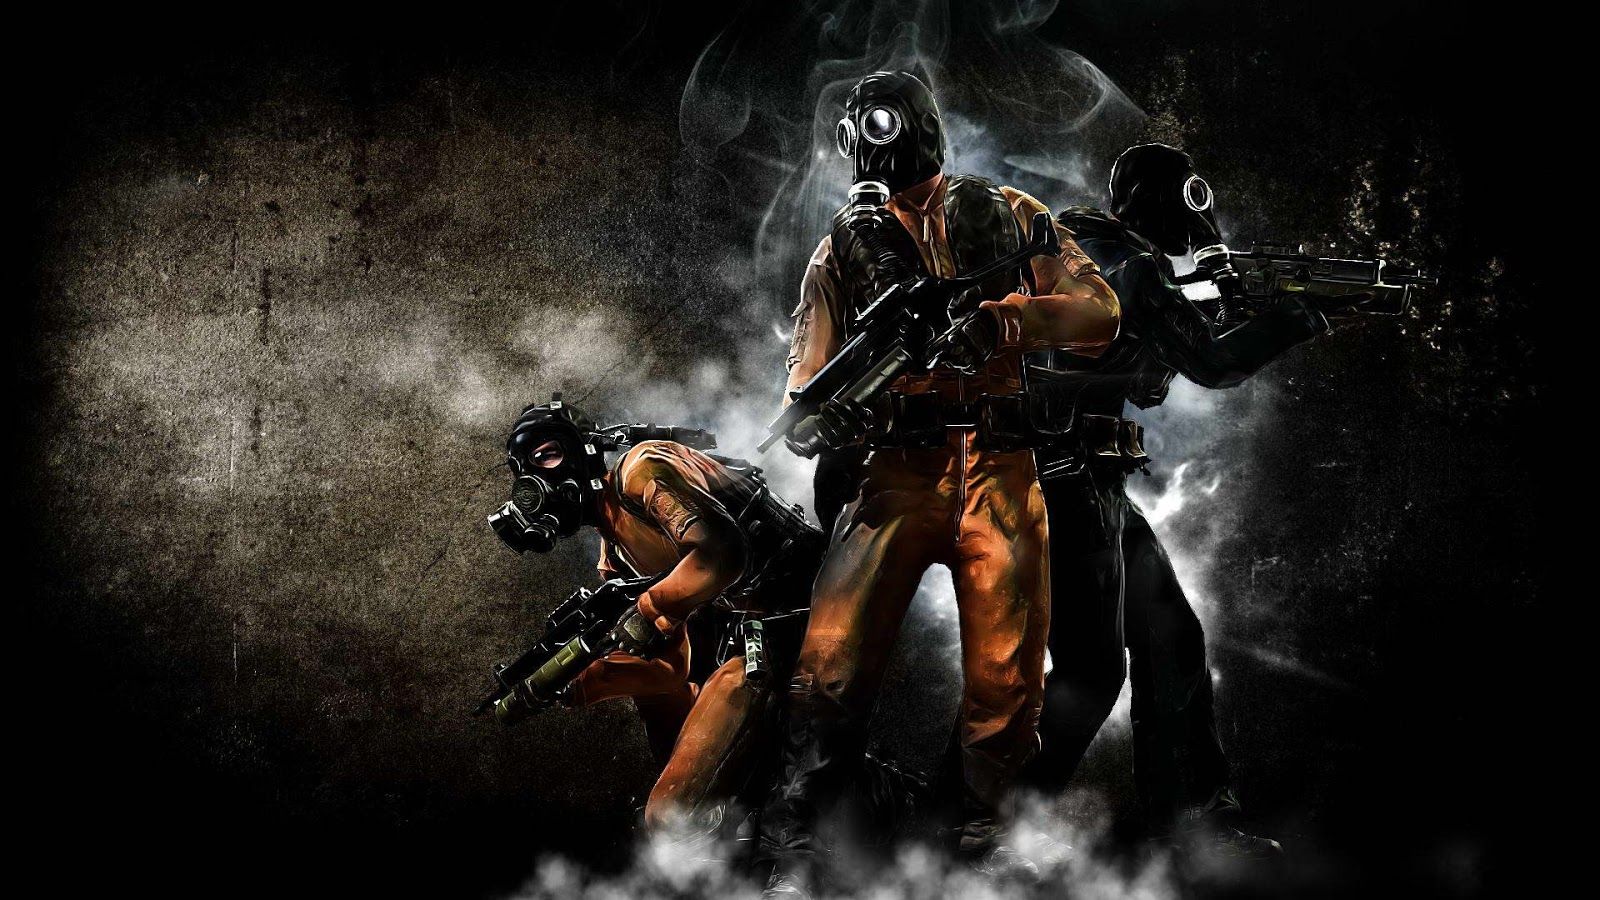 Free download call of duty black ops 2 wallpaper call of duty black ops 2 wallpaper [1600x900] for your Desktop, Mobile & Tablet. Explore Black Ops 2 Zombies Wallpaper